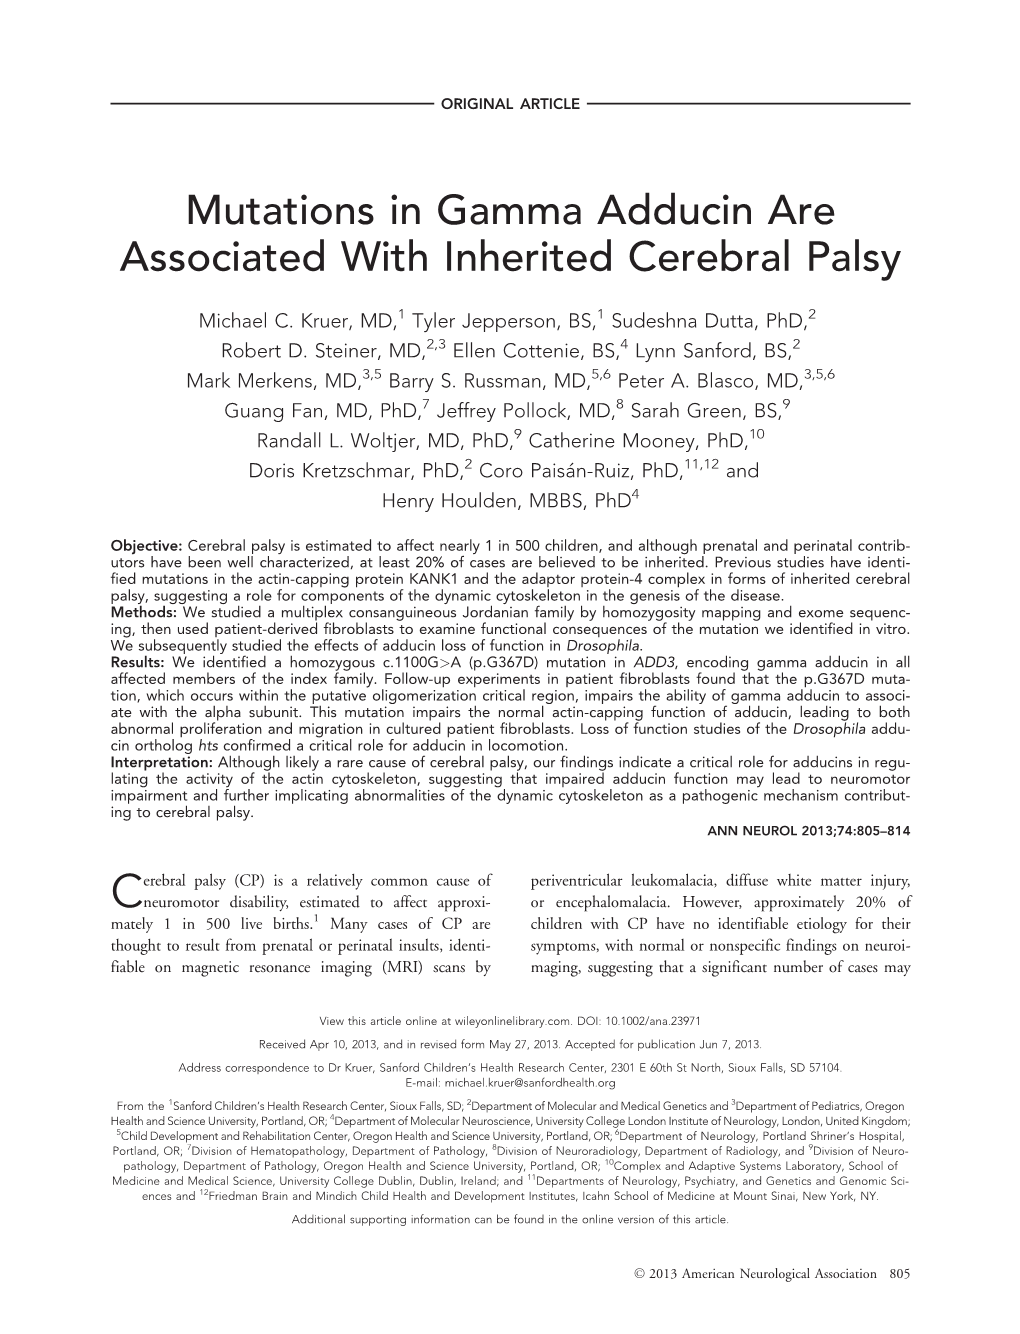 Mutations in Gamma Adducin Are Associated with Inherited Cerebral Palsy